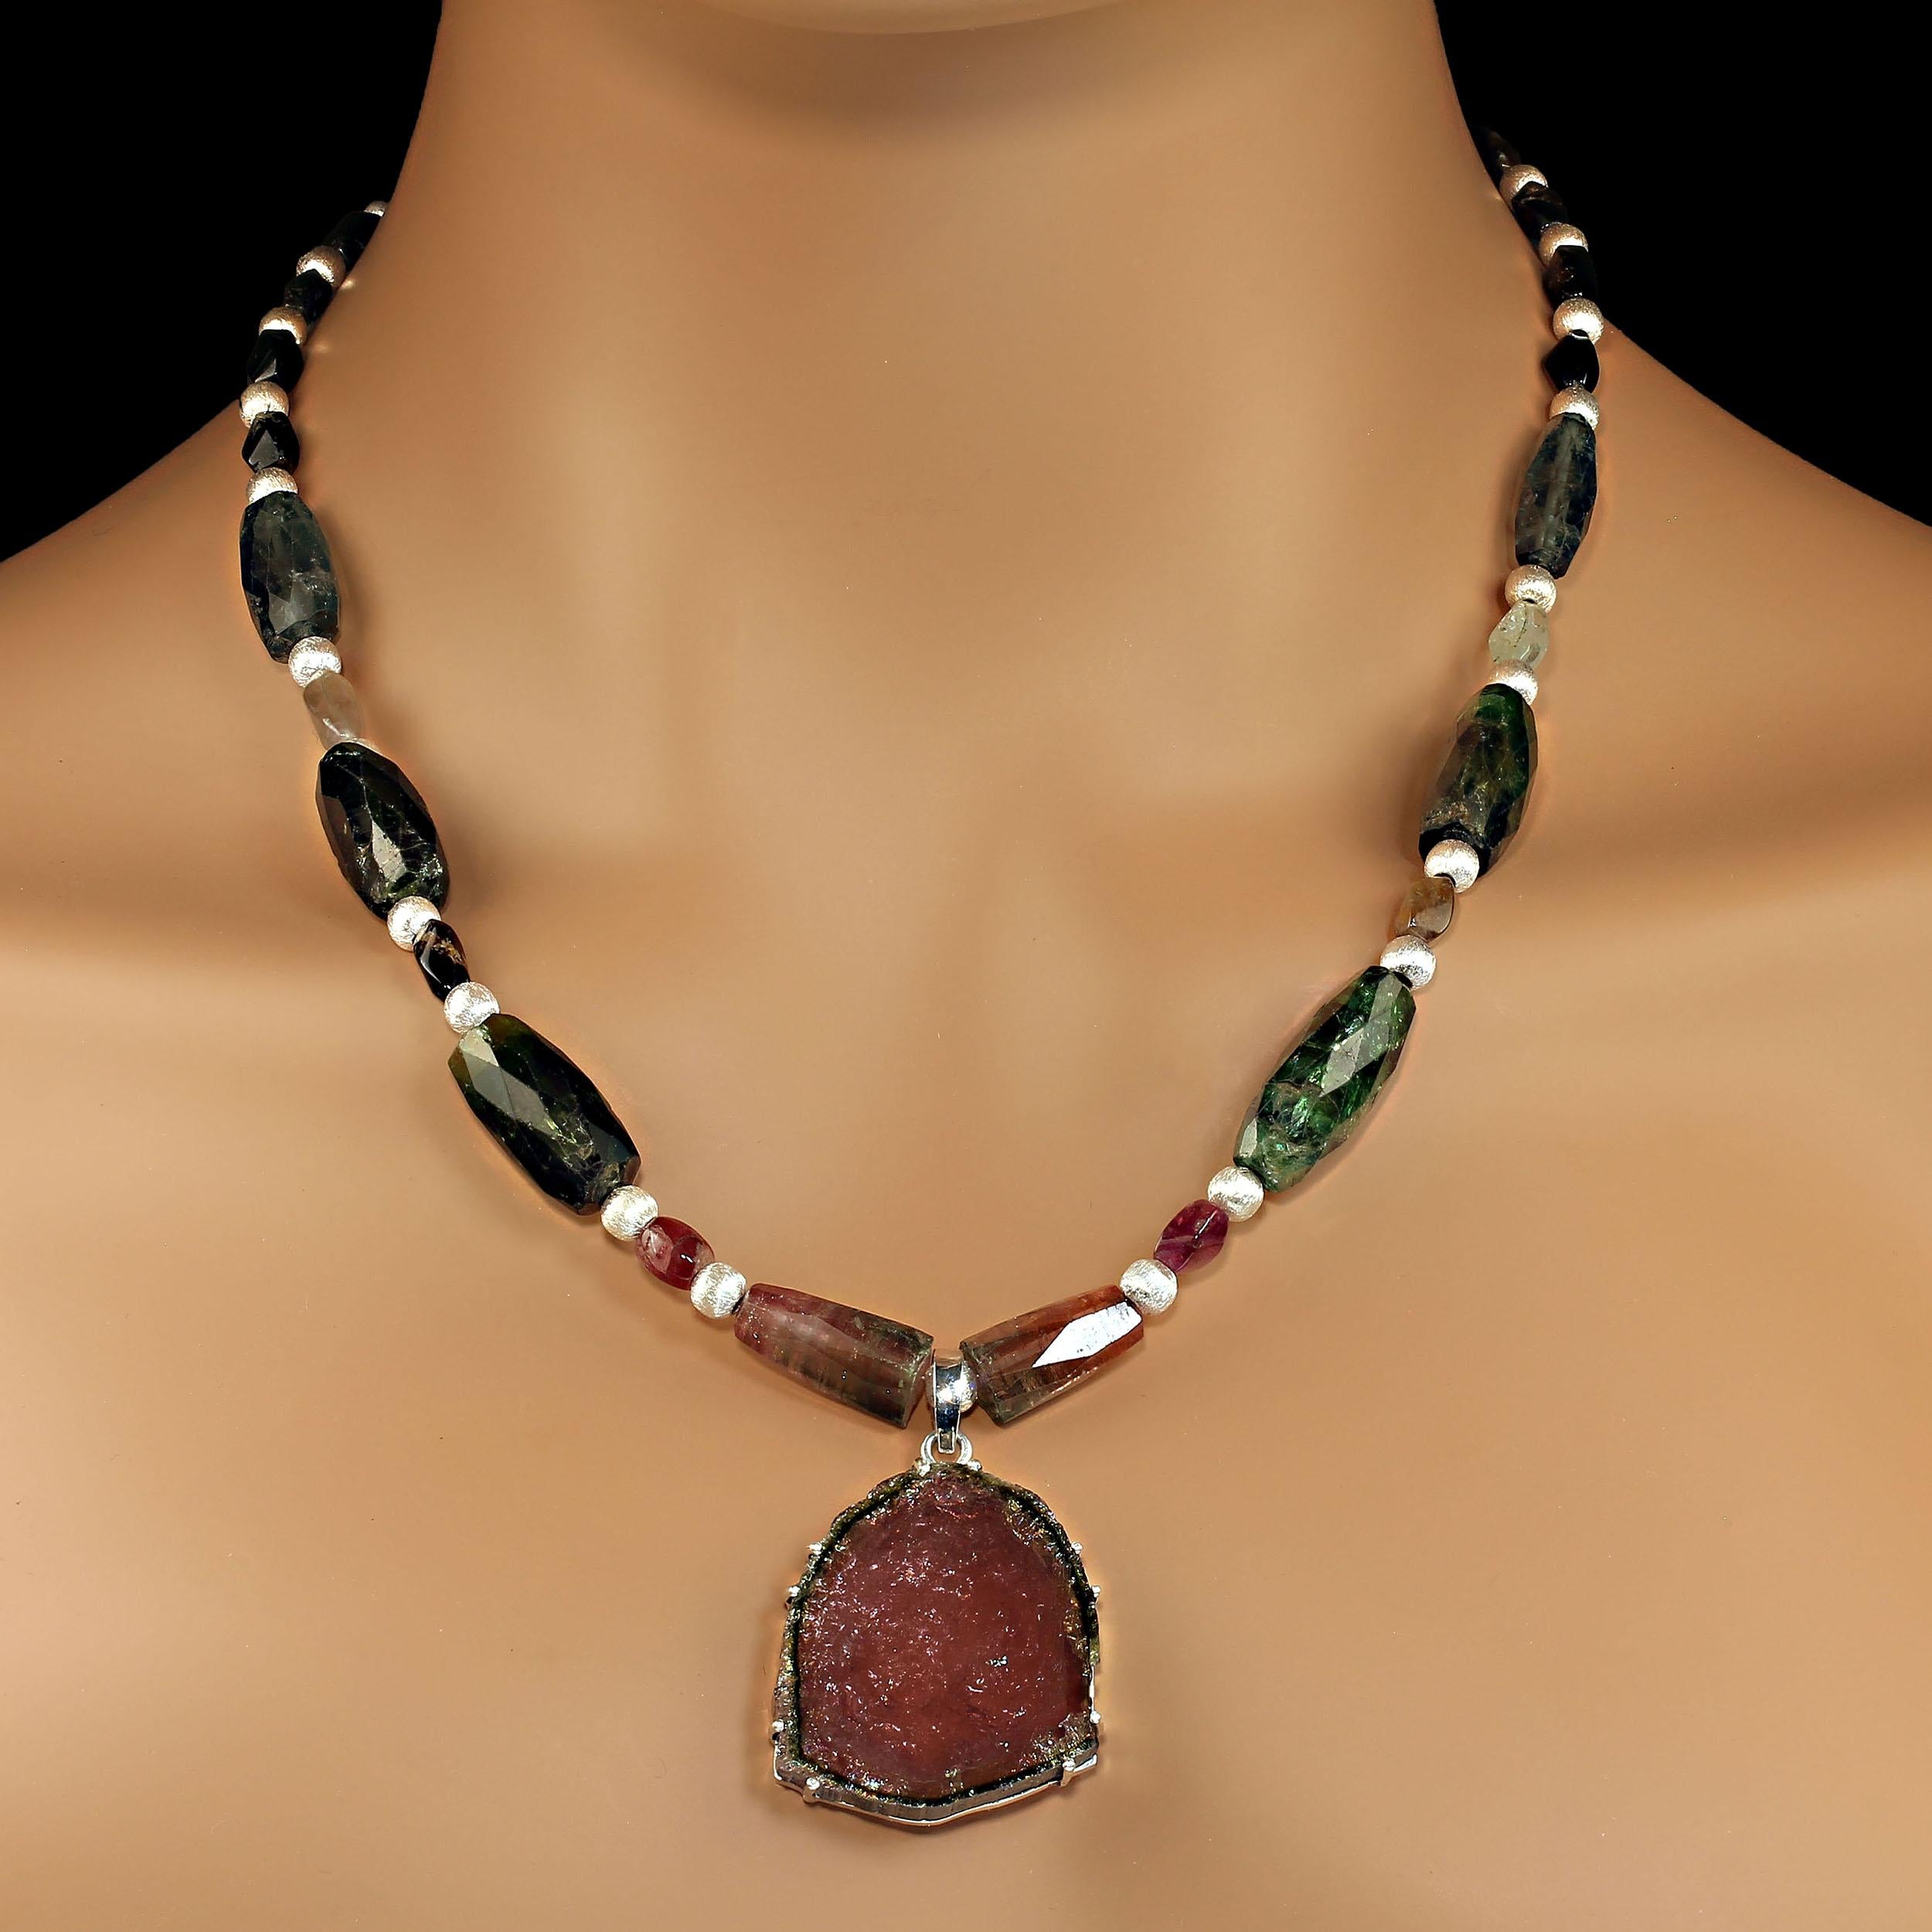 Magnificent multi color tourmaline necklace featuring a 50 carat watermelon tourmaline slice.  This elegant necklace is 20 inches in length.  The tourmaline slice is 50 carats and 30 x 34 MM.  There are matte silver accents between the tourmalines